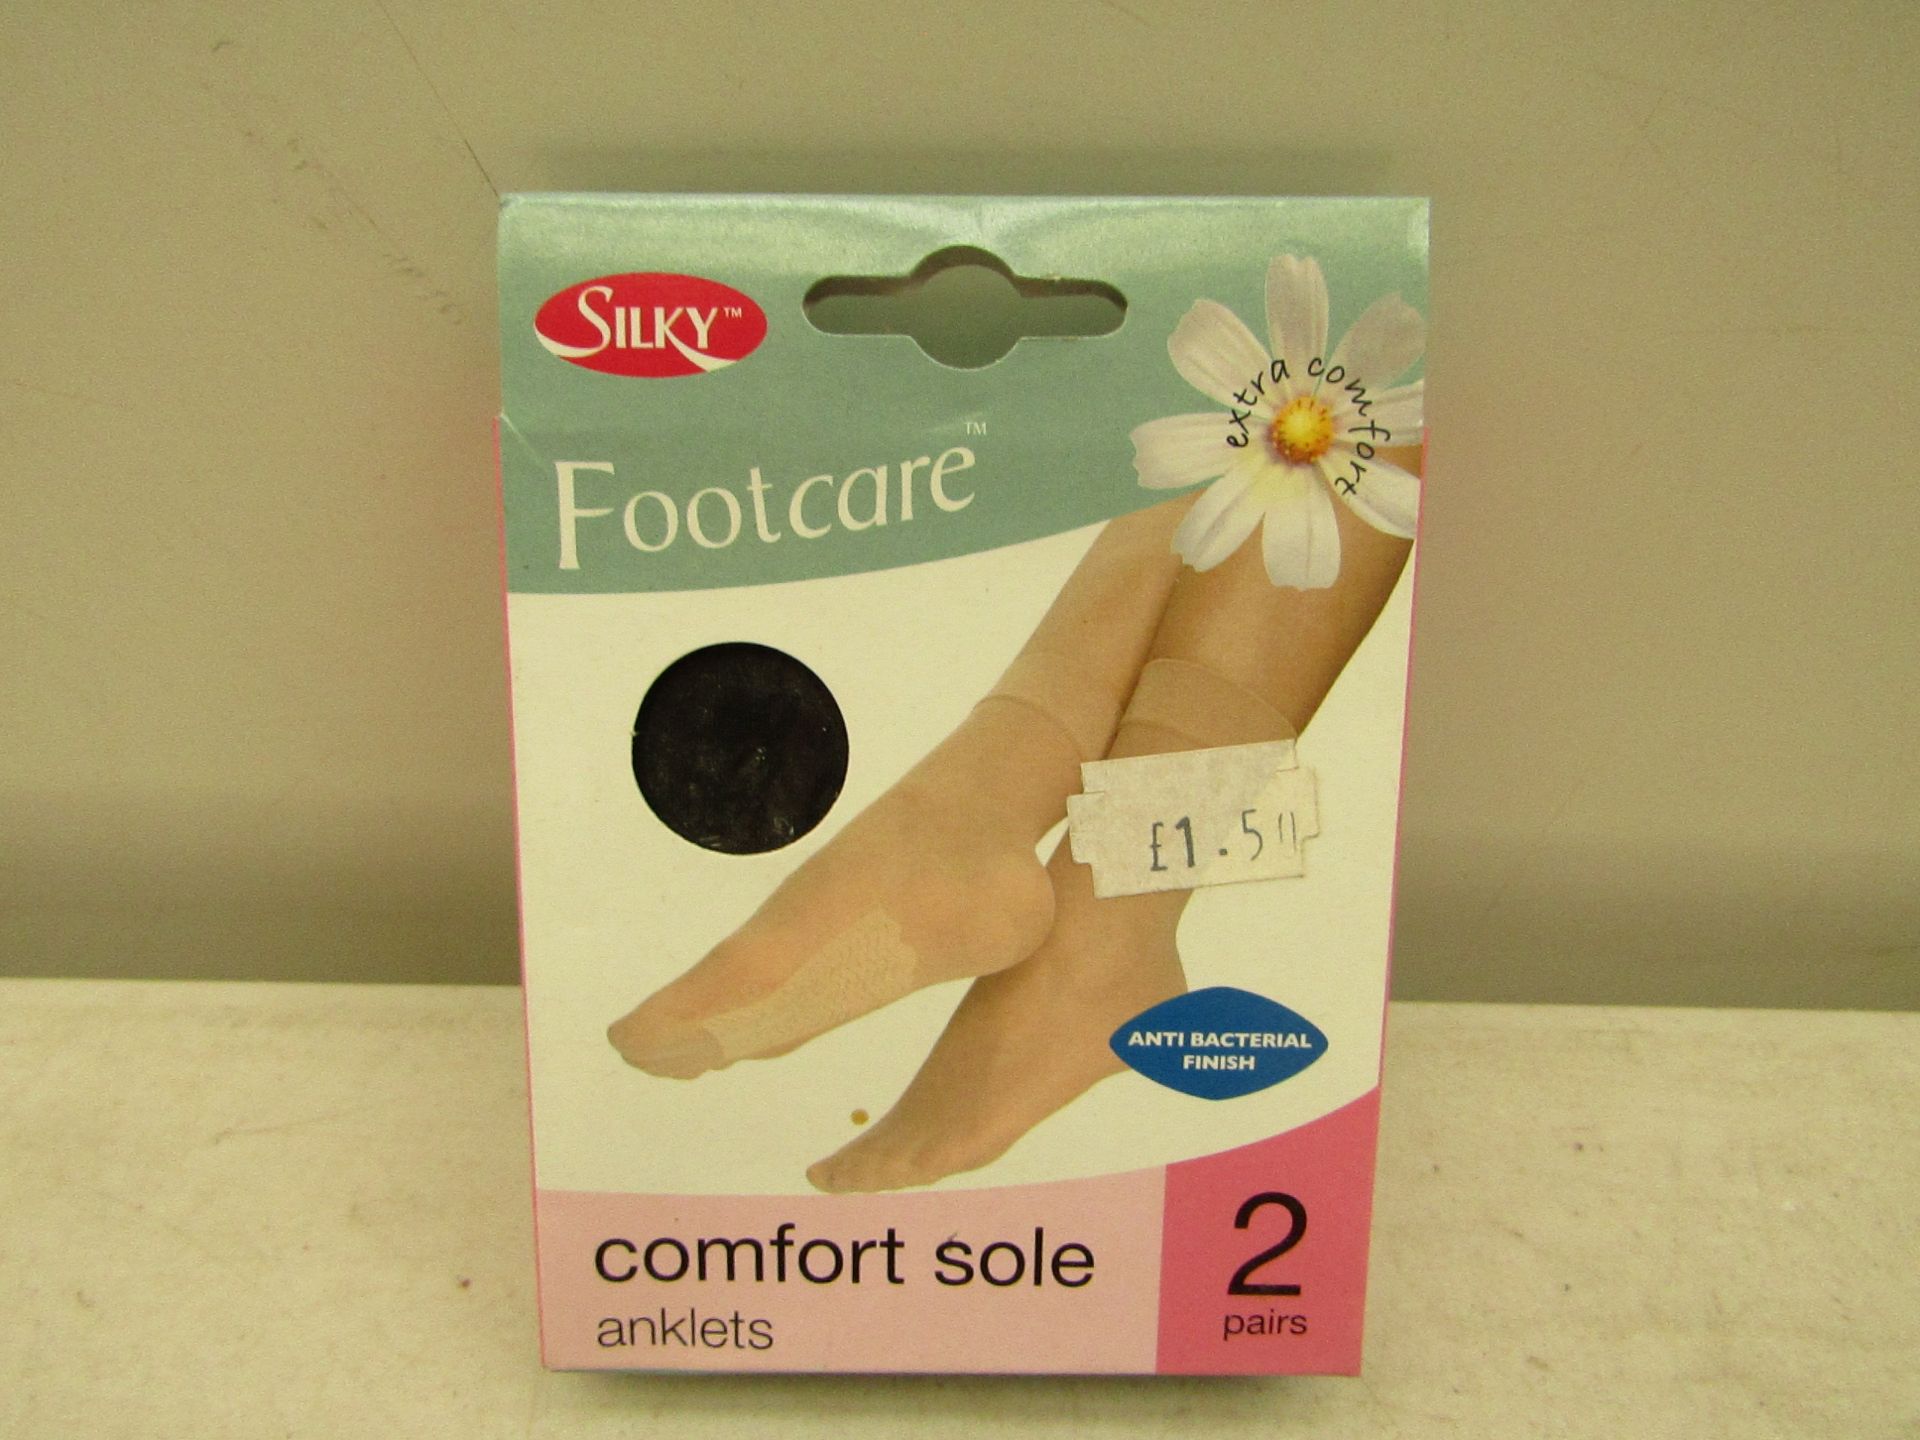 6x Silky footcare comfort sole anklets, all new and boxed.